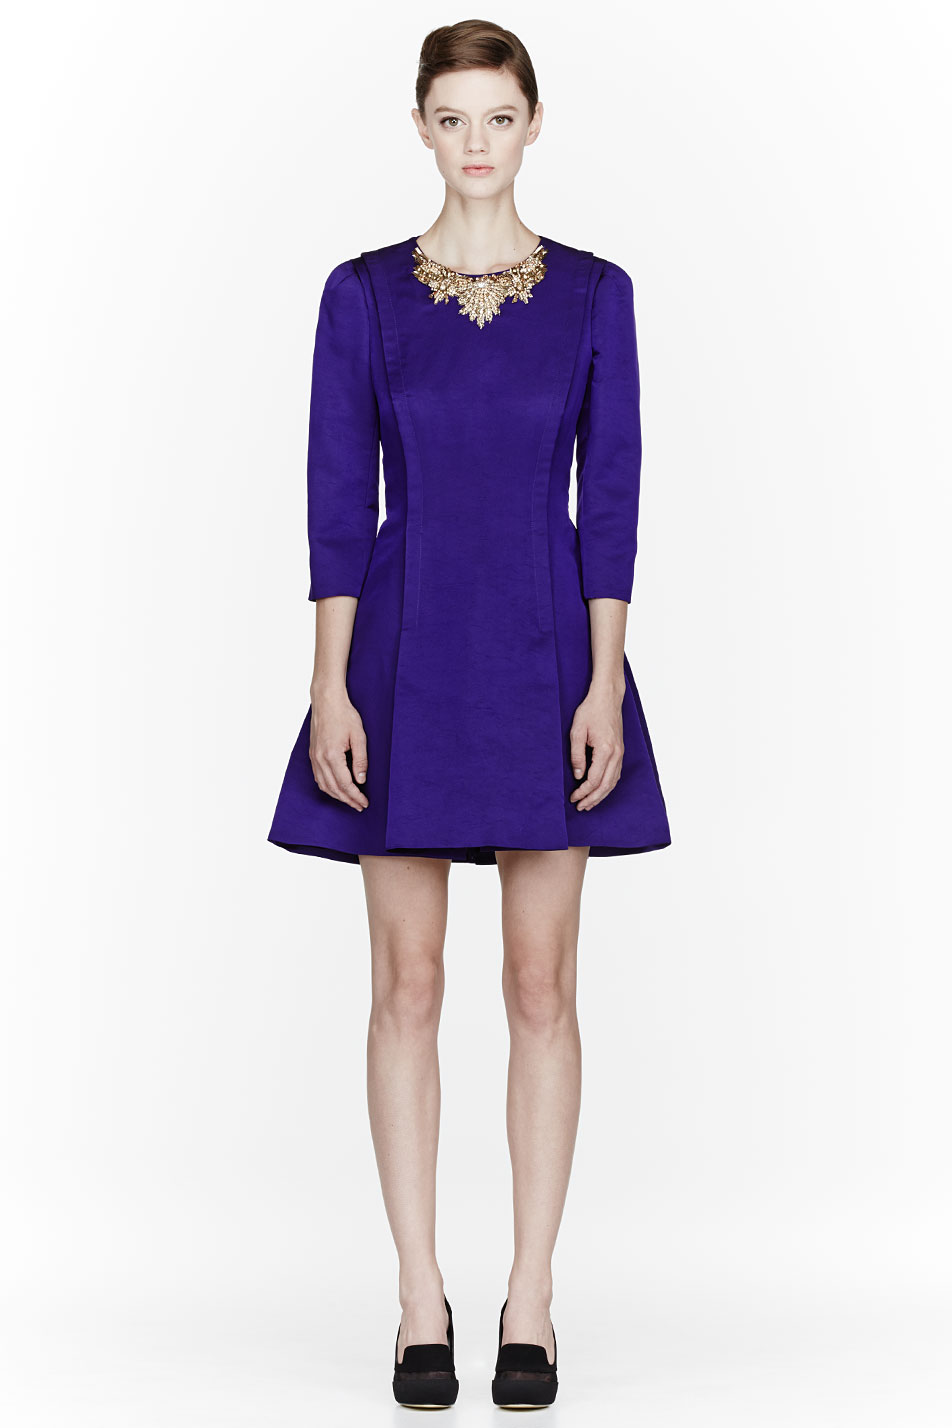 Lyst - Alexander Mcqueen Royal Purple Silk Crystal Embroidered Align ...